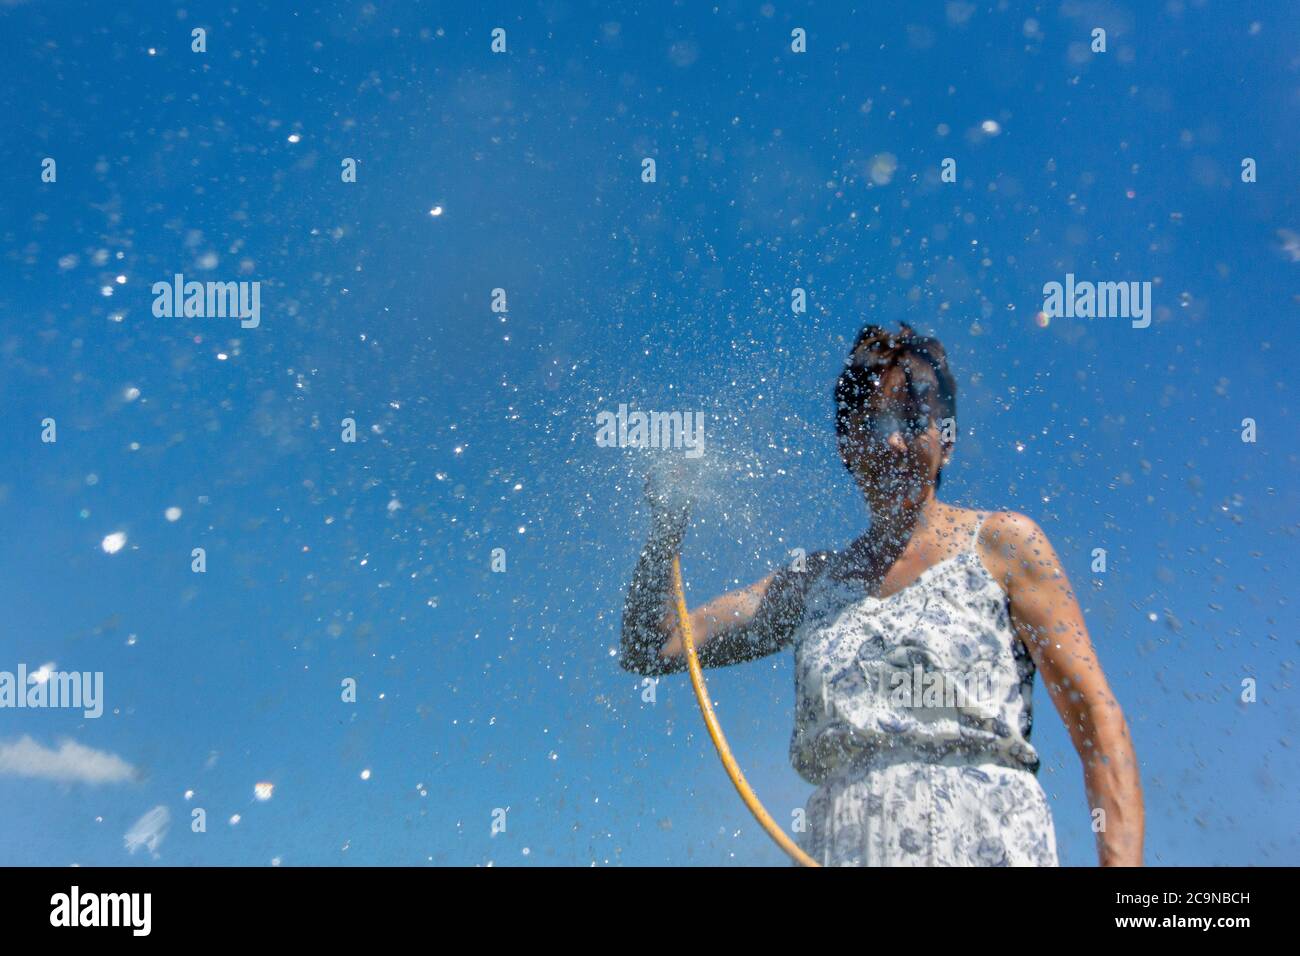 Woman spraying water from a hosepipe. North Yorkshire, UK. Stock Photo